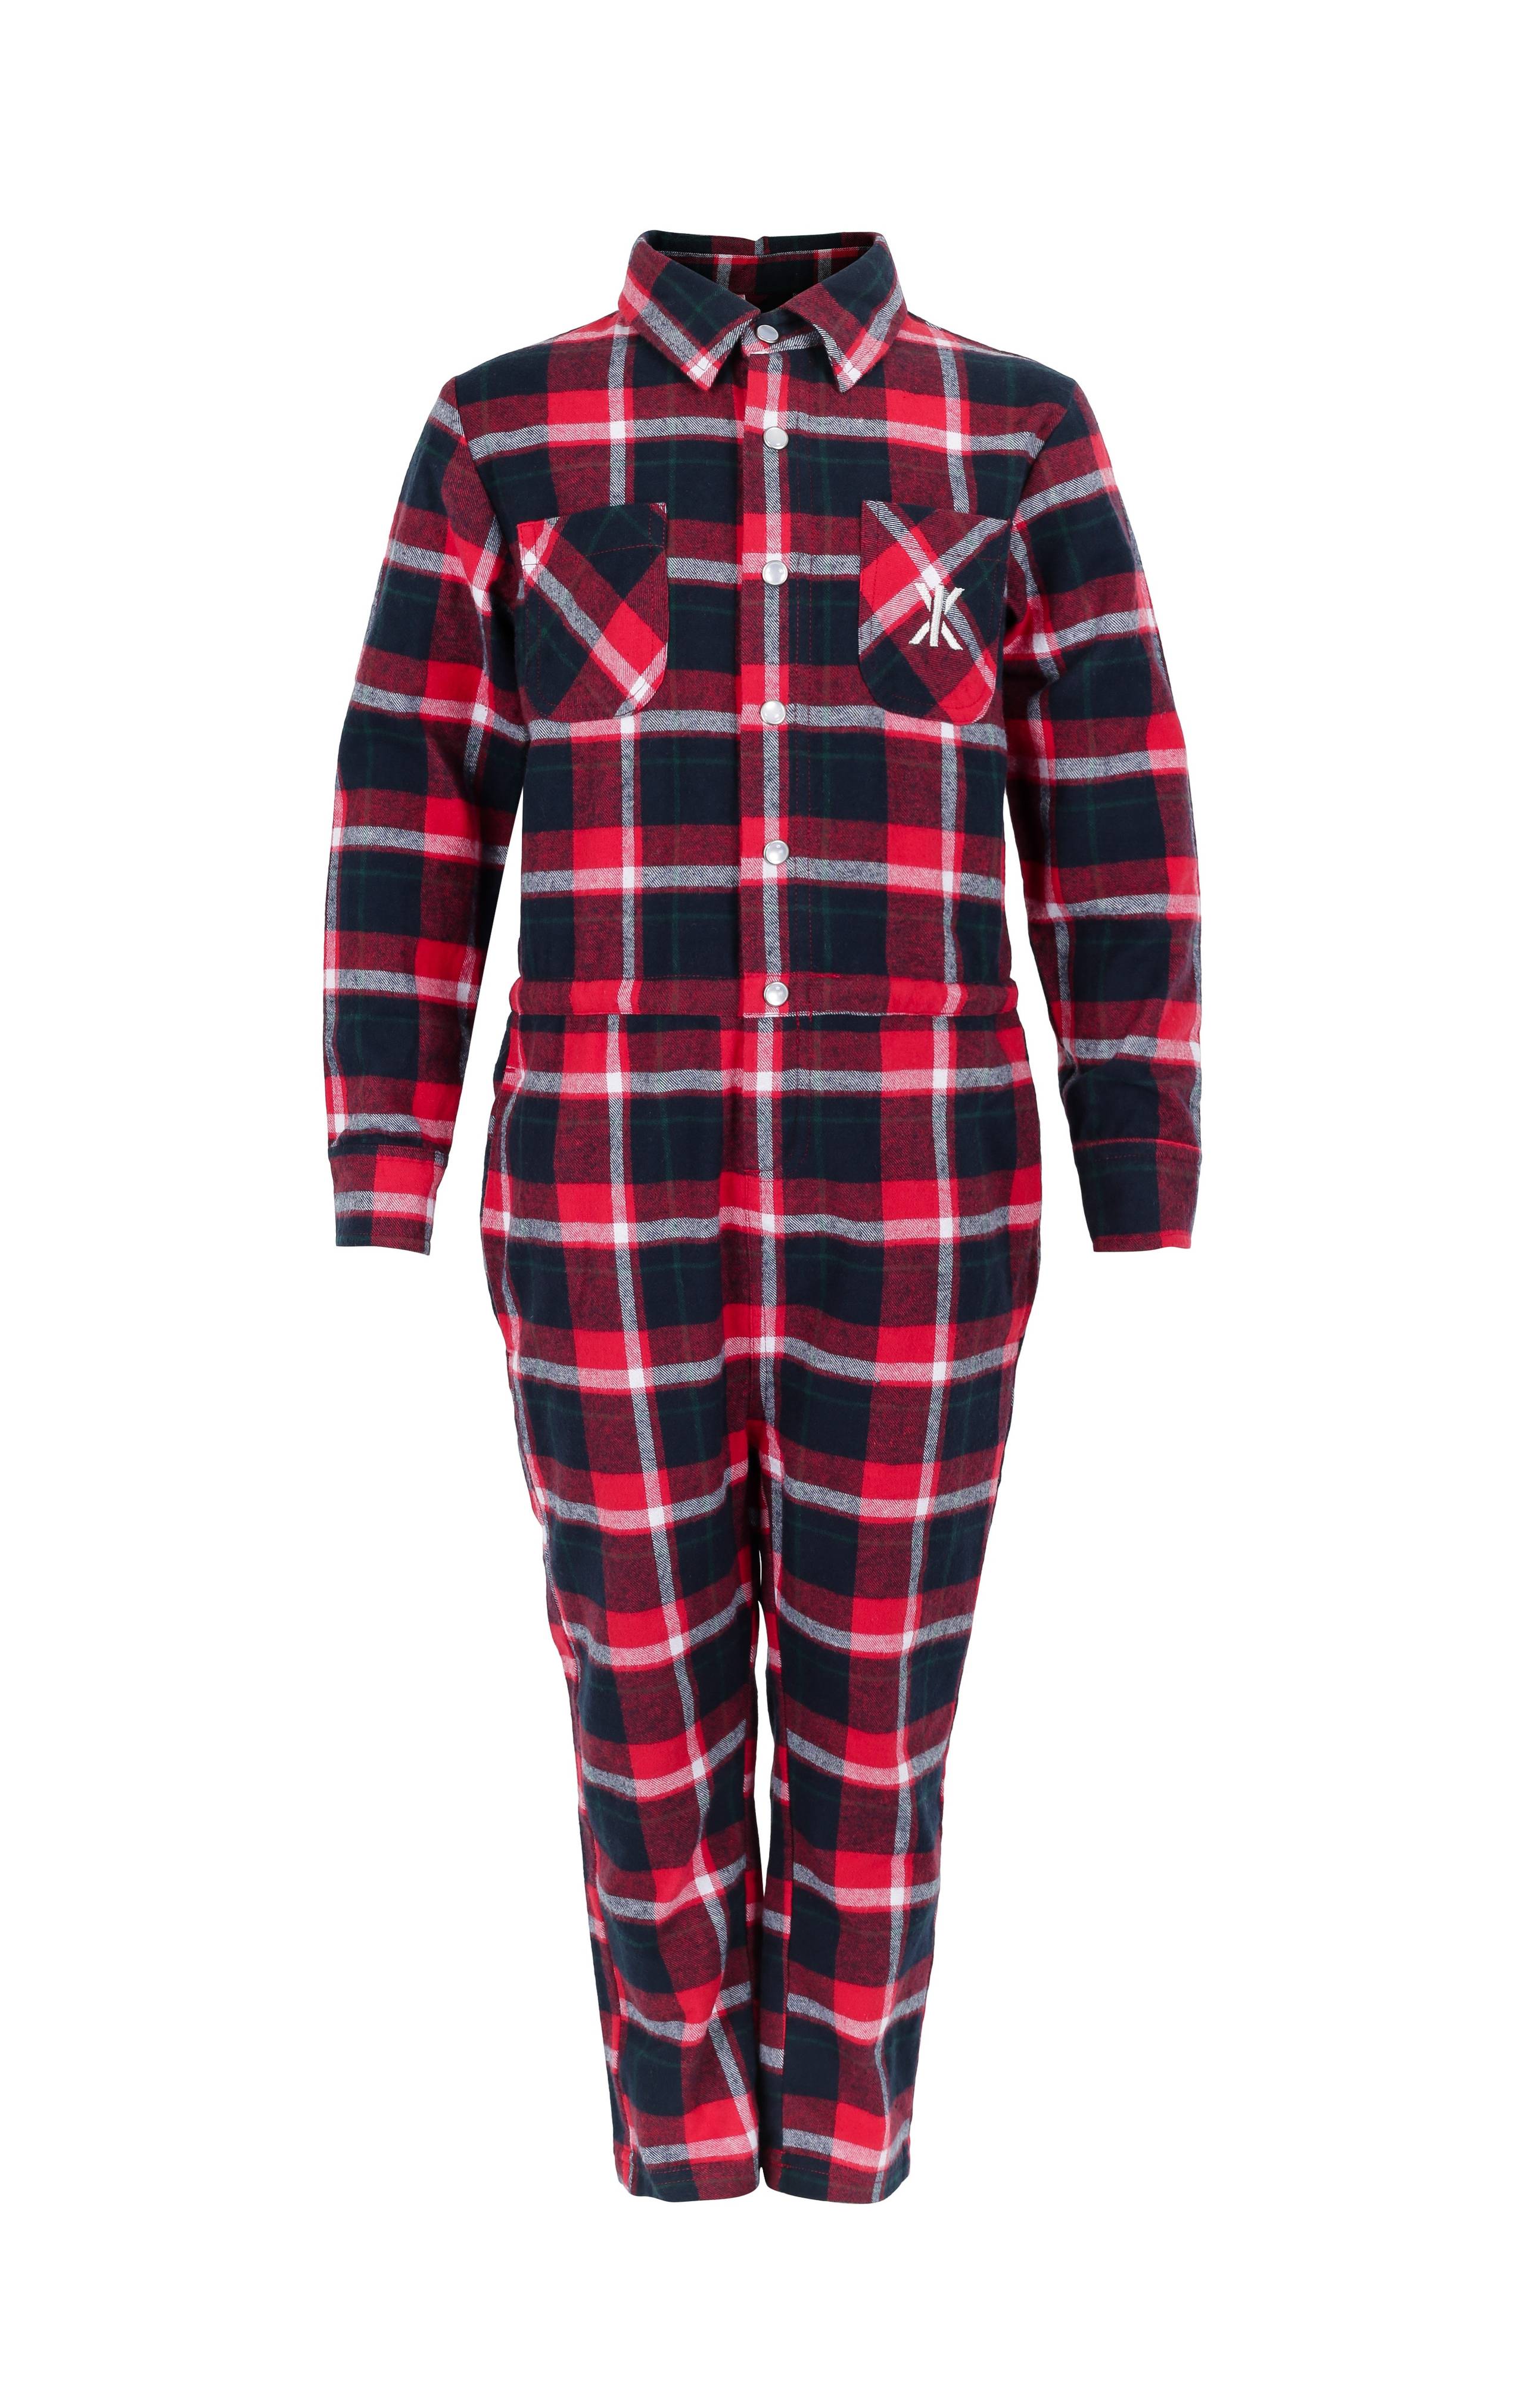 Onepiece Check Kids Jumpsuit Red / Black - 1